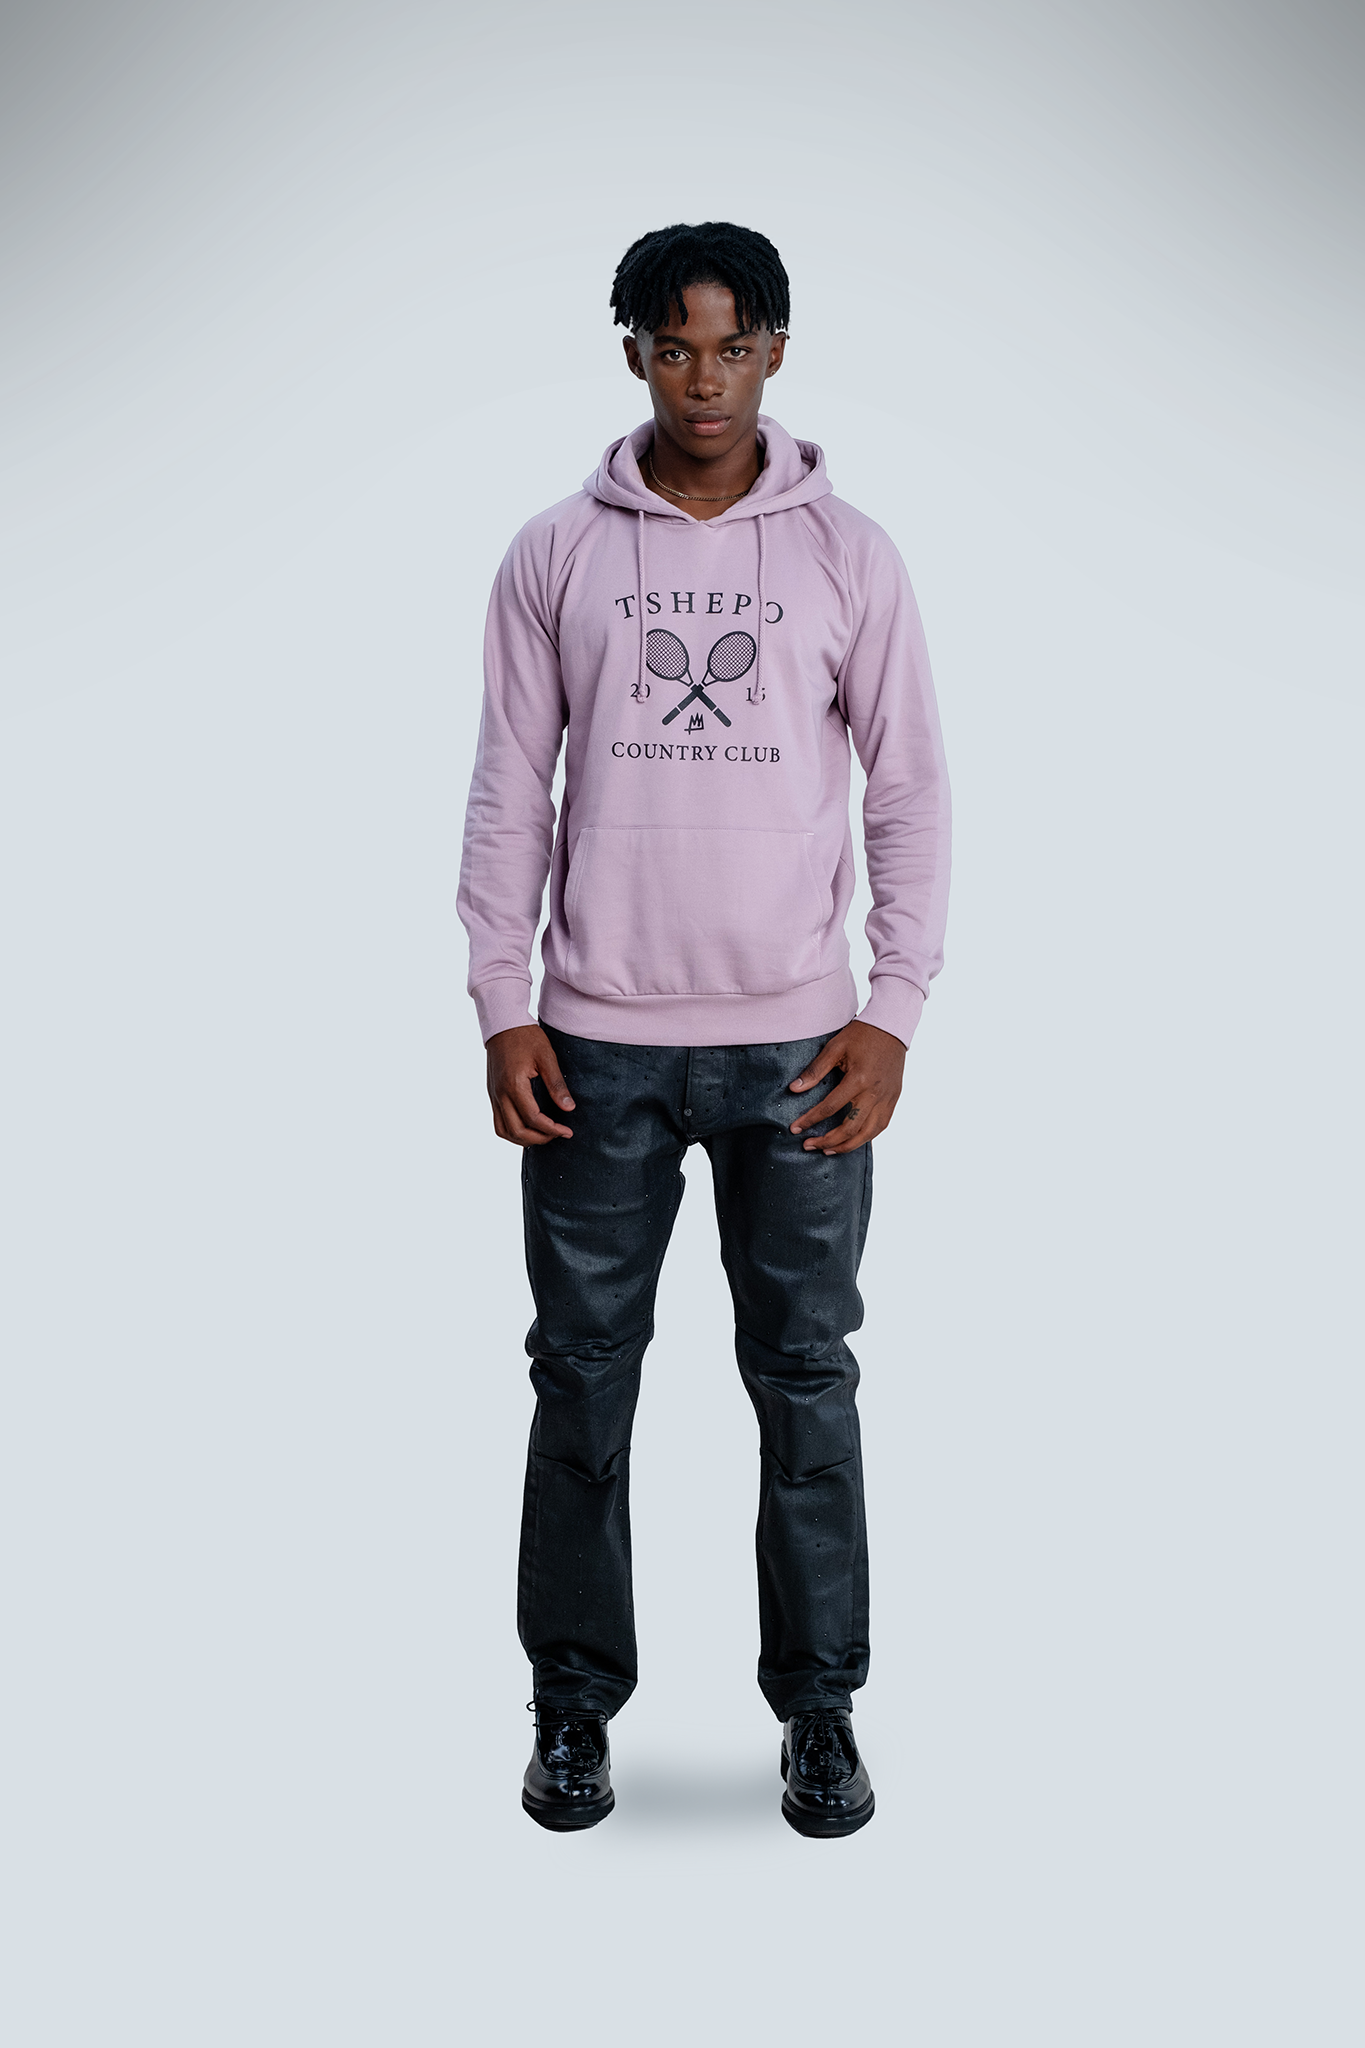 Dusty Pink Country Club Lightweight Hoodie 1 | TSHEPO